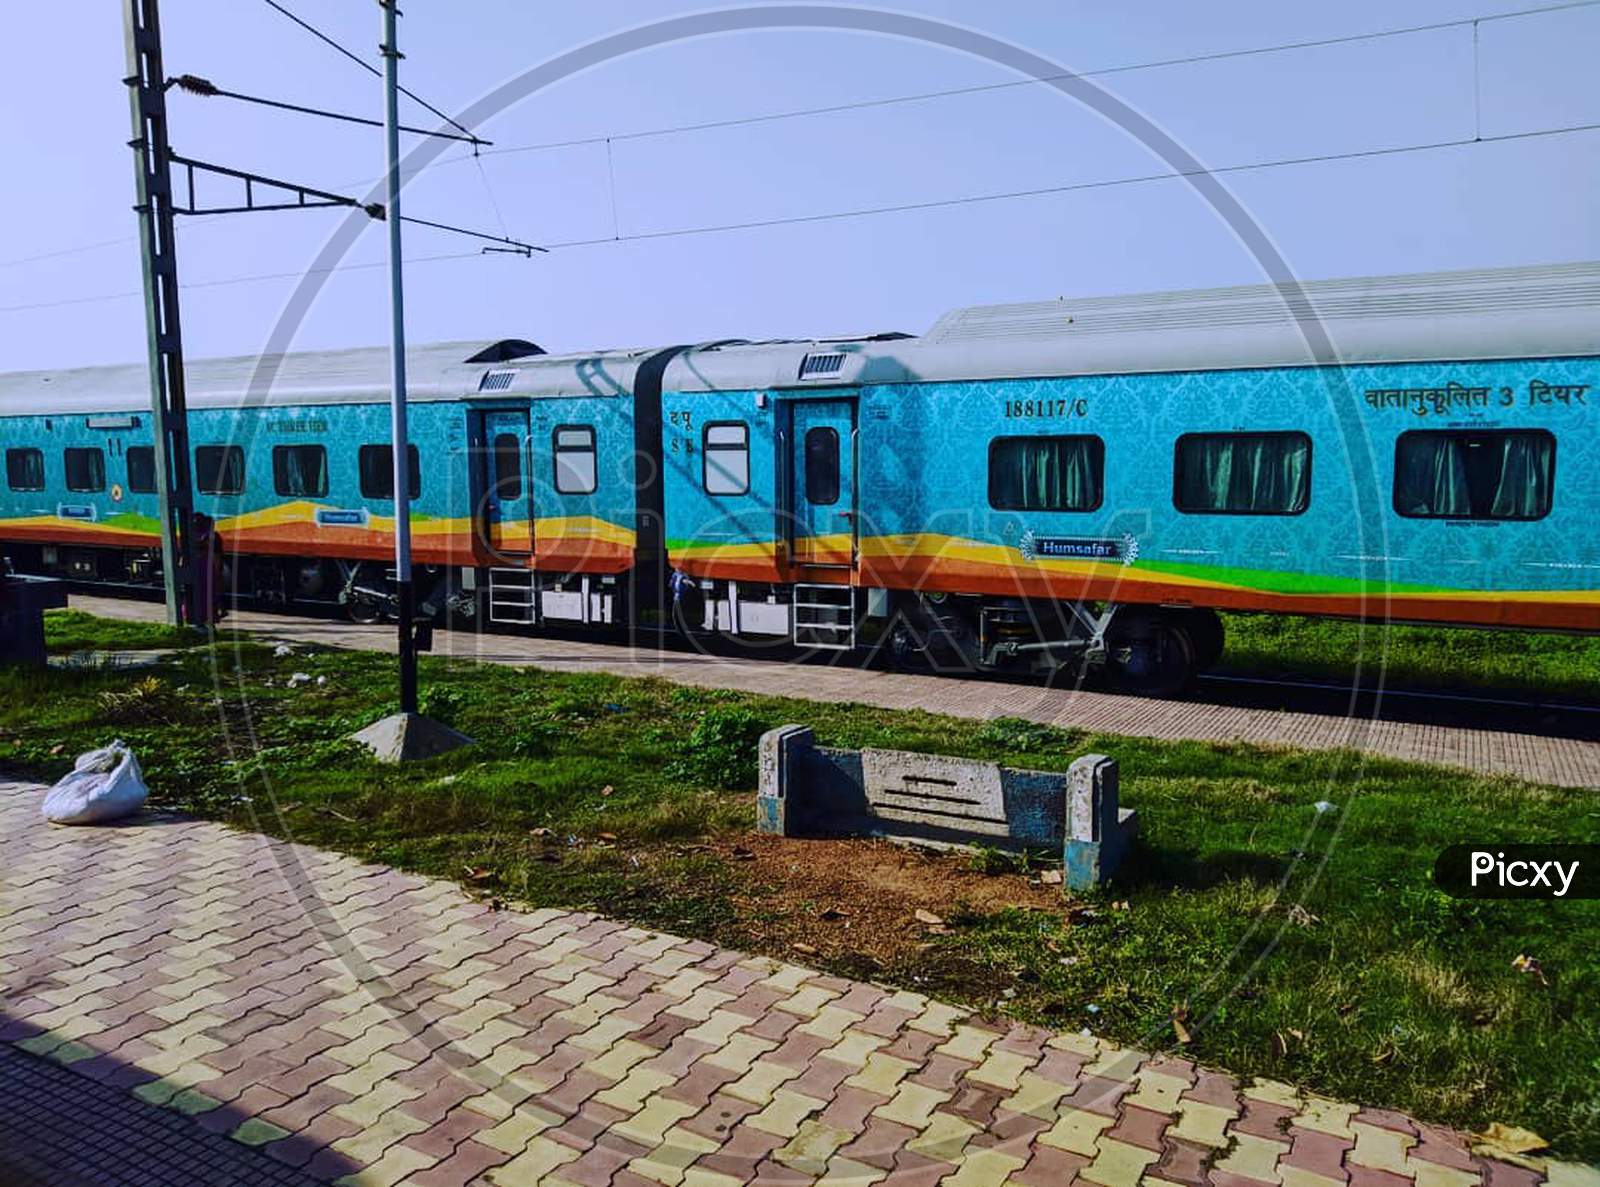 Nice colourful coaches of the train.